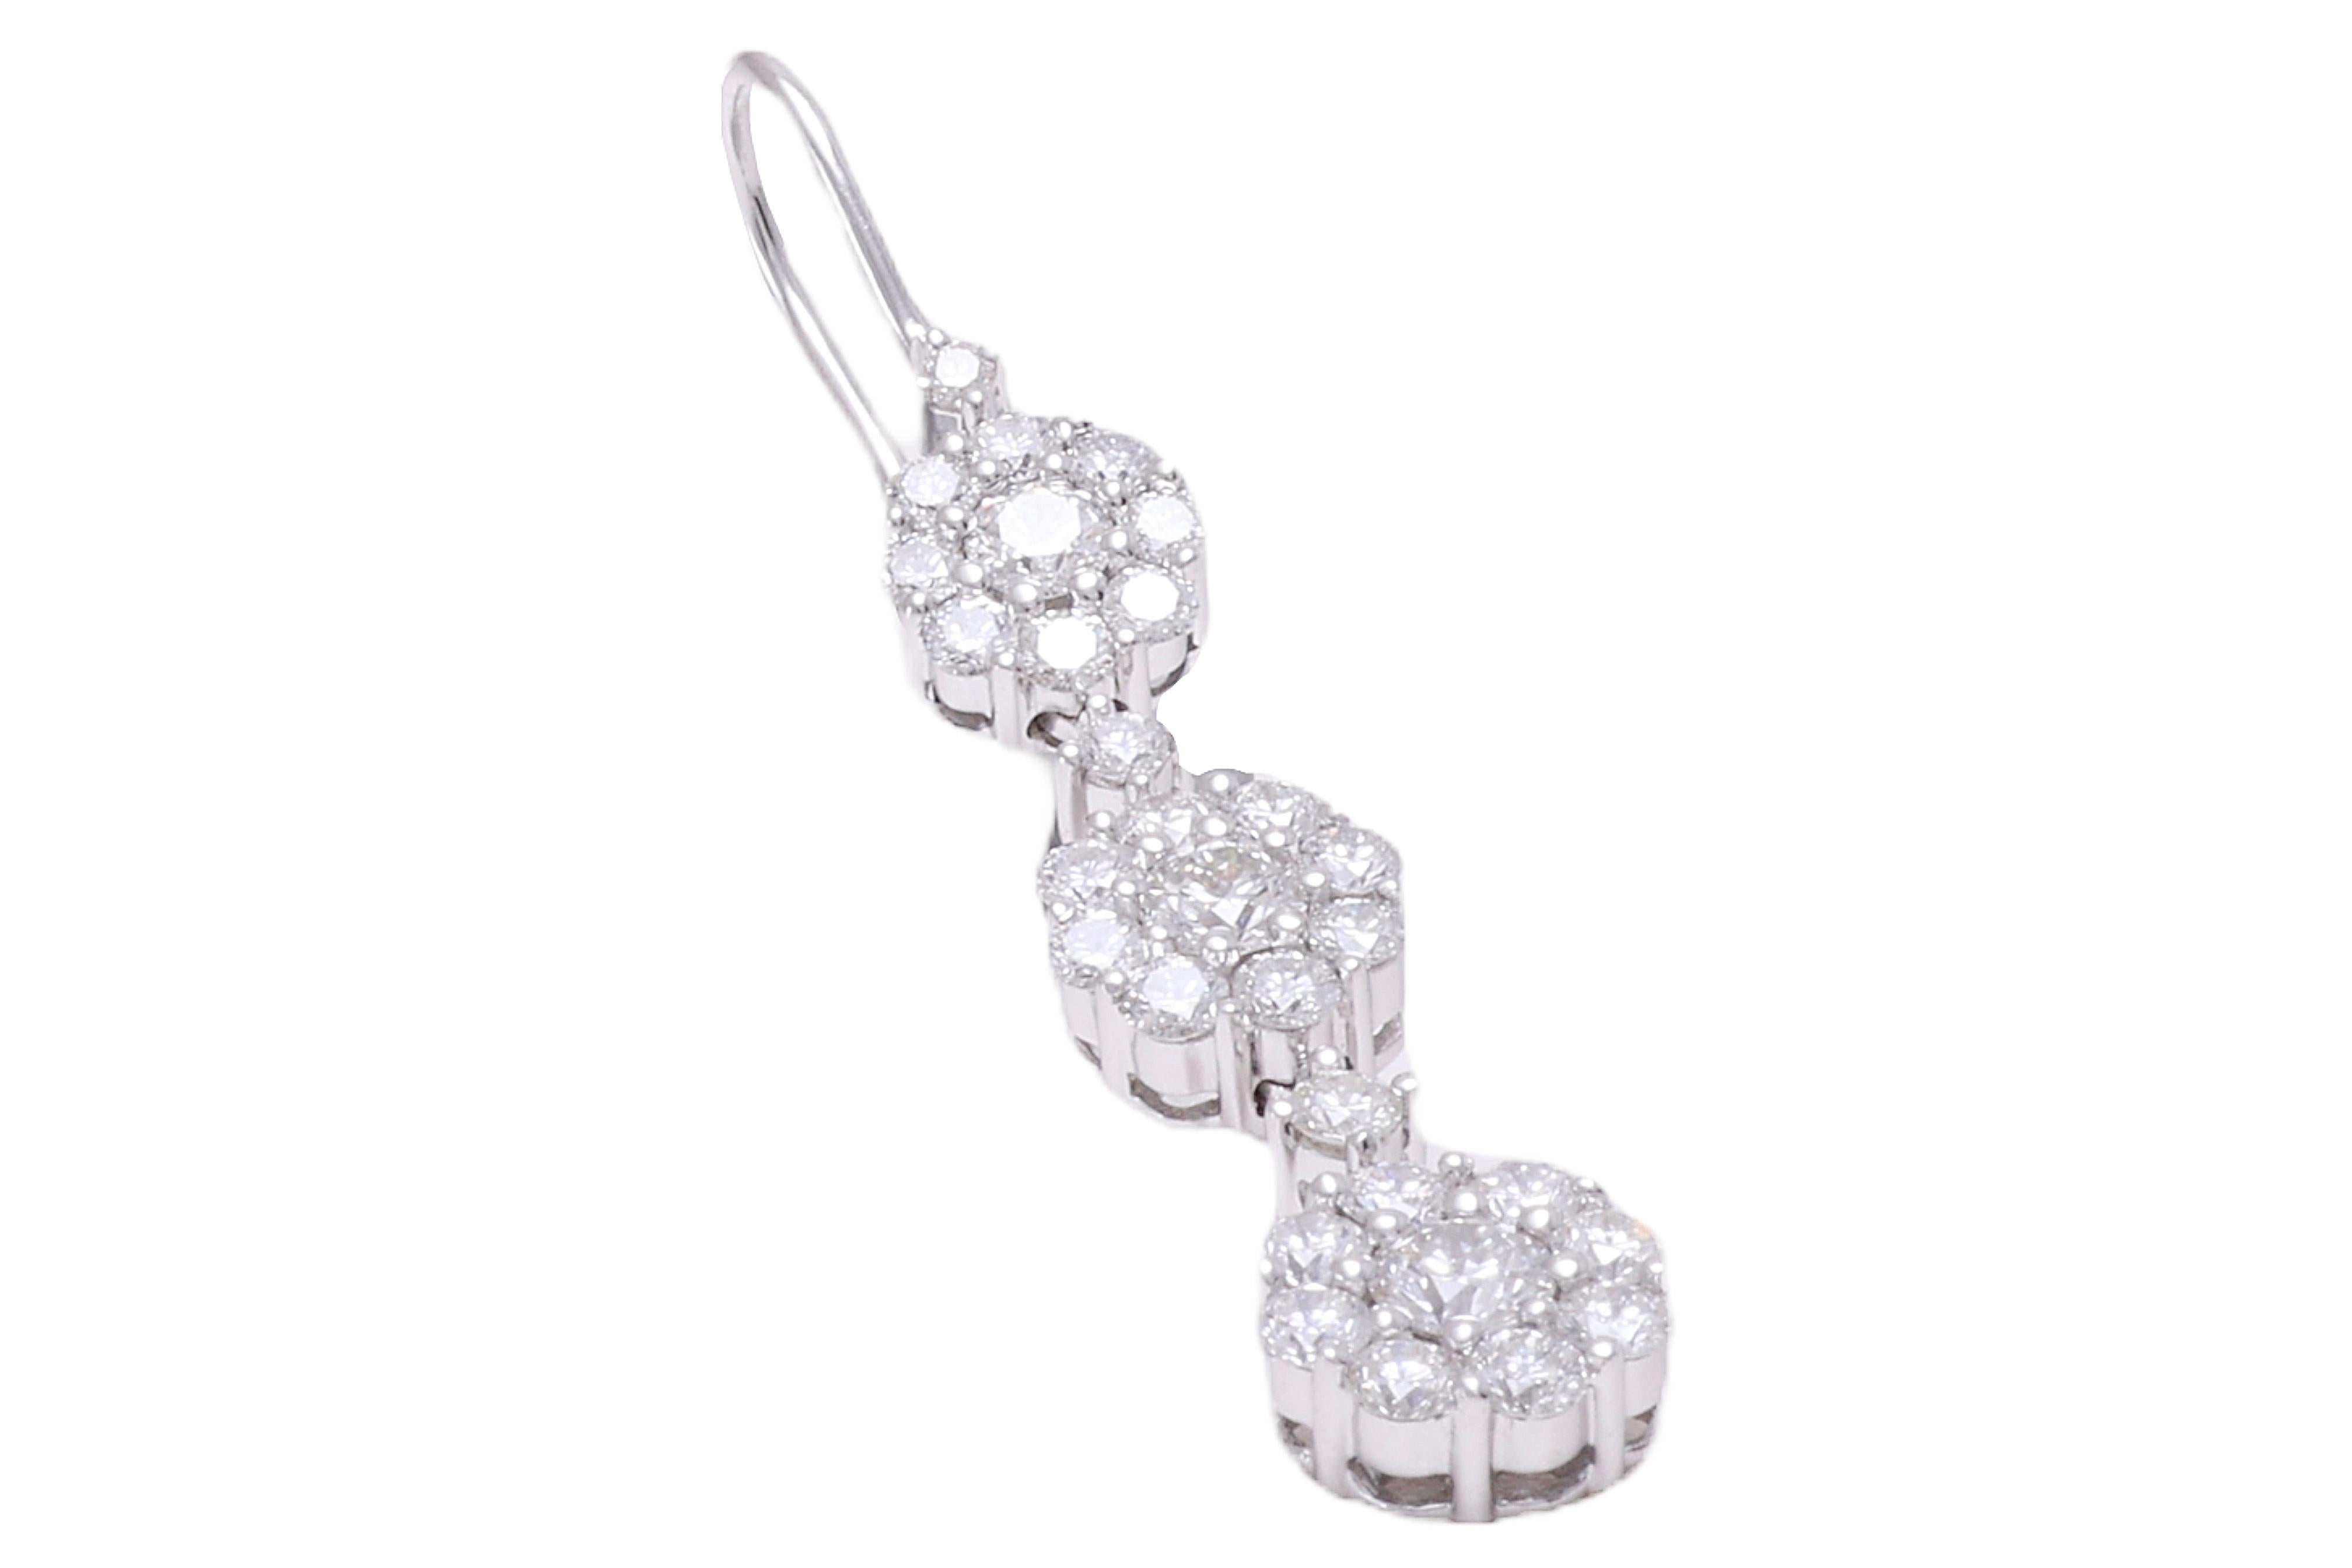 Brilliant Cut 18 kt. White Gold Flower Earrings With 2.66 ct. Diamonds For Sale